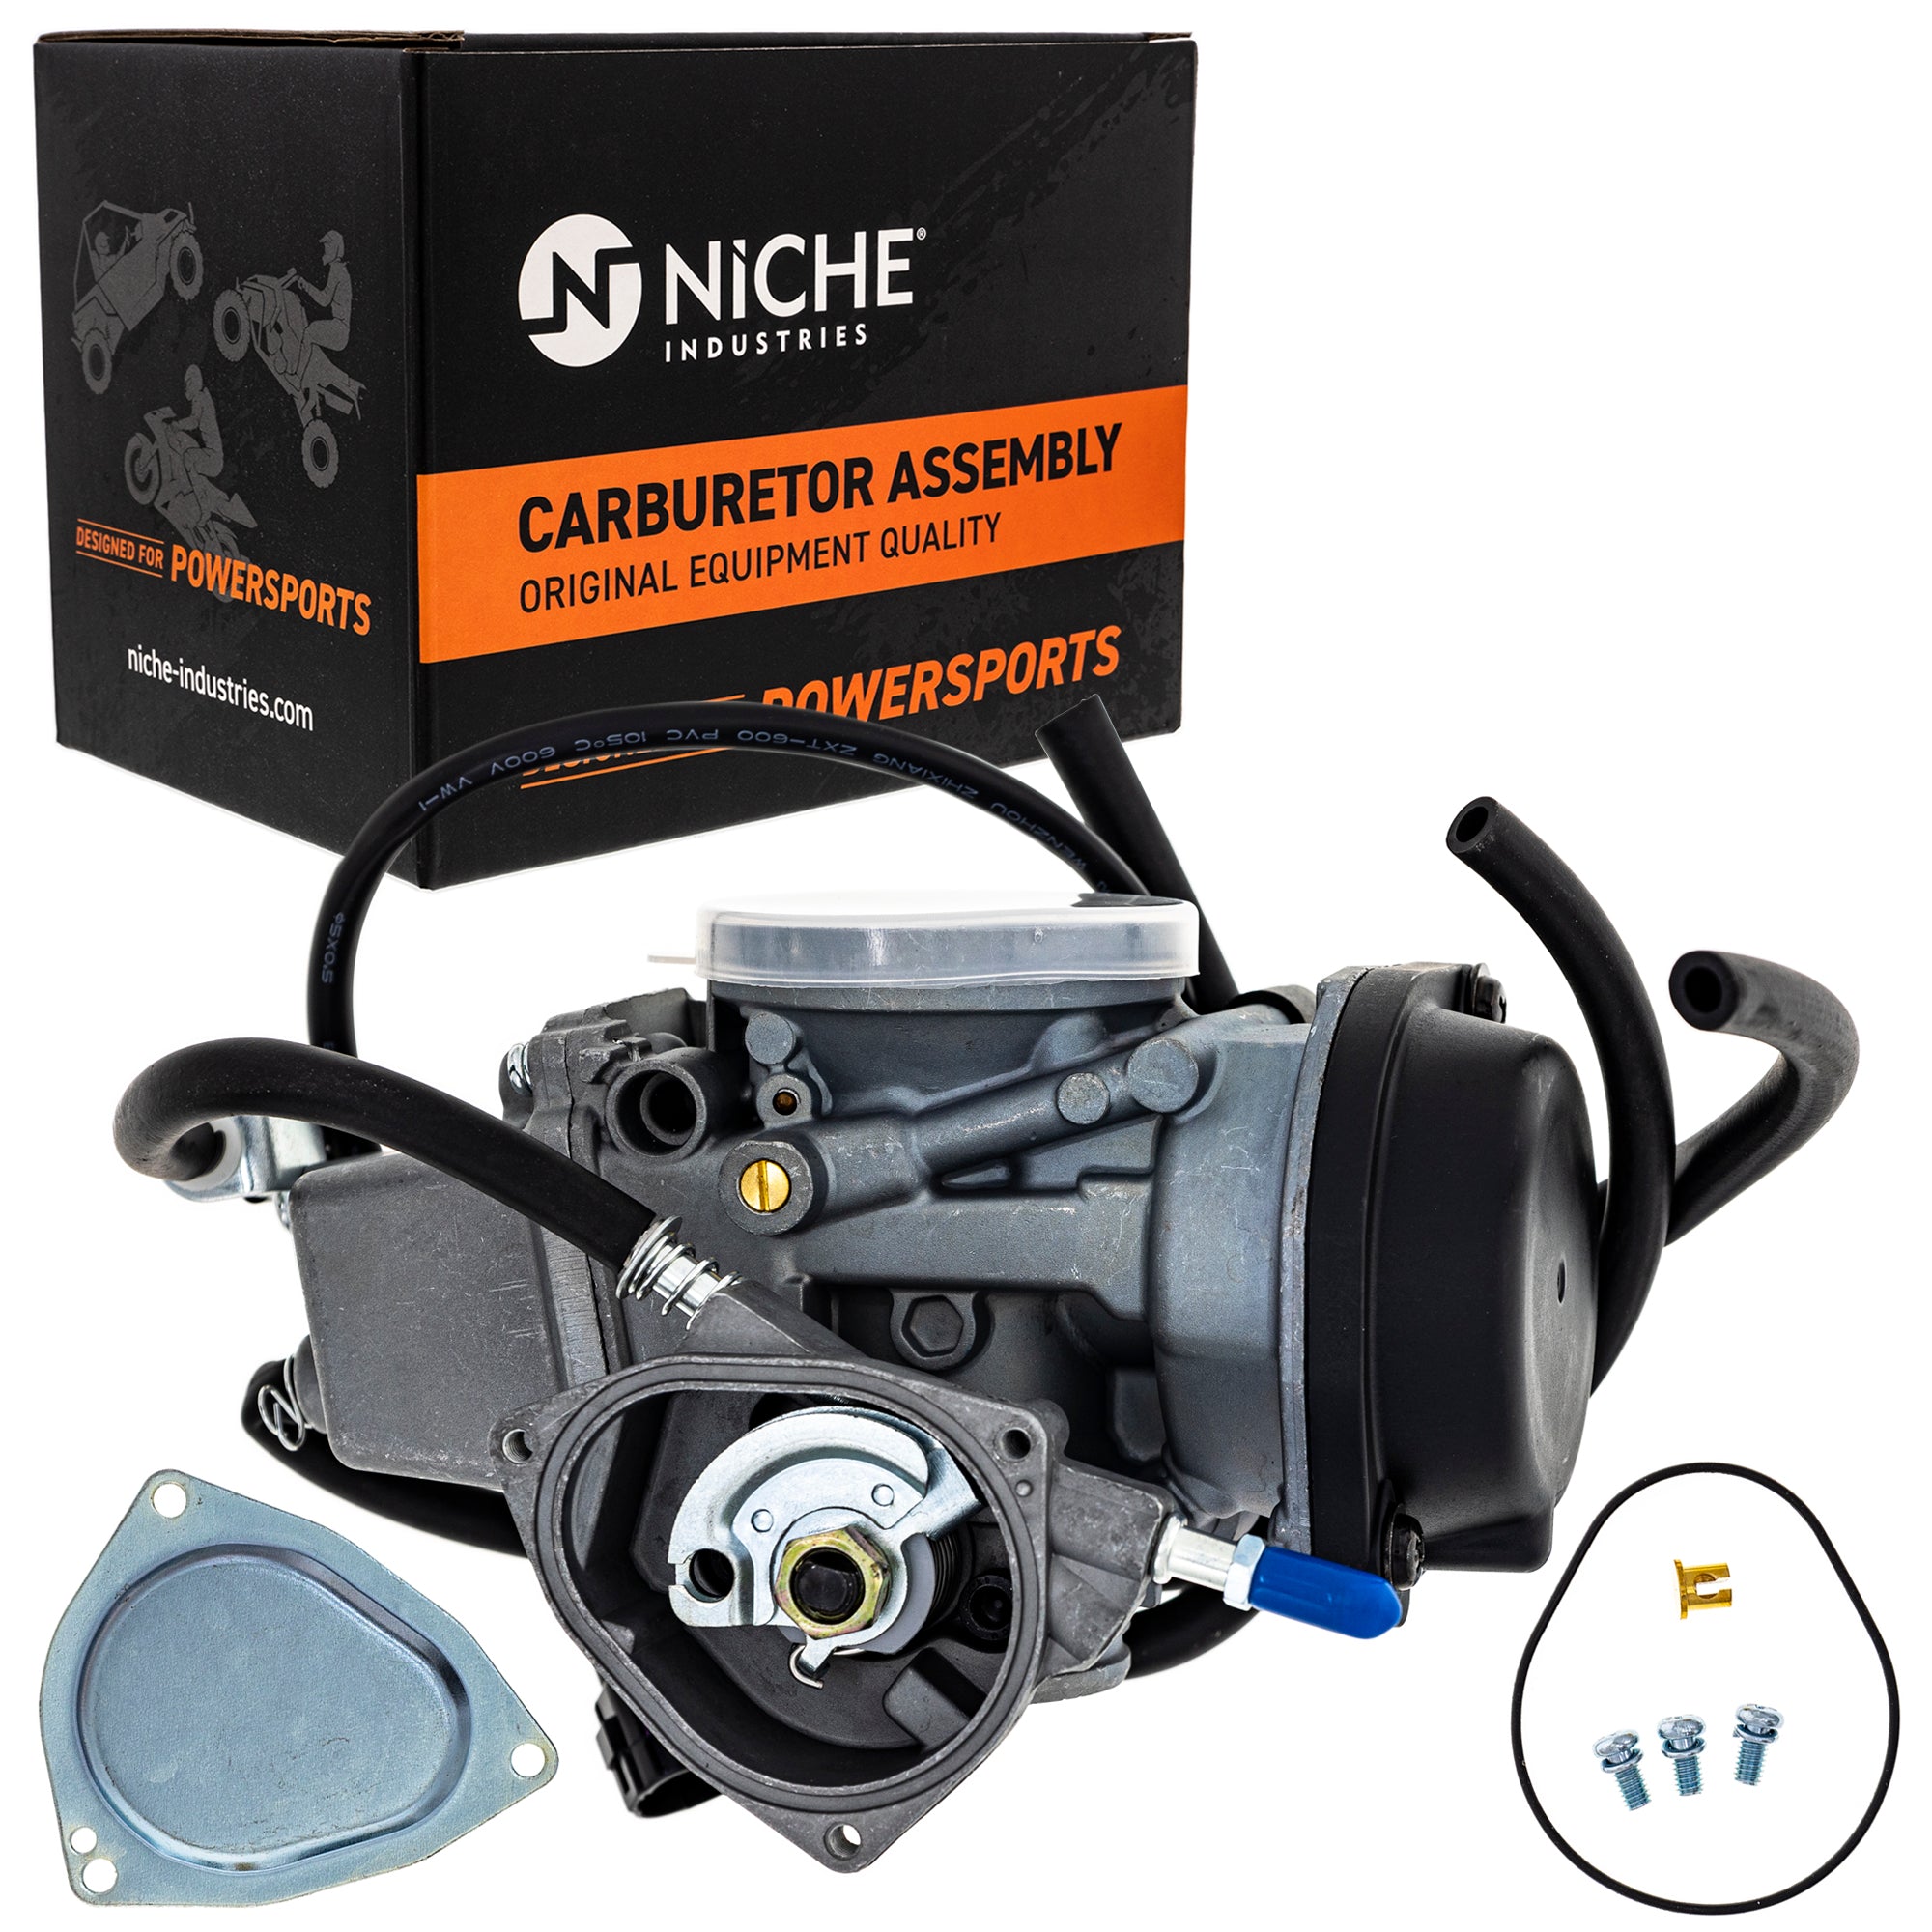 NICHE 519-KCR2205B Carburetor Assembly for zOTHER KFX400